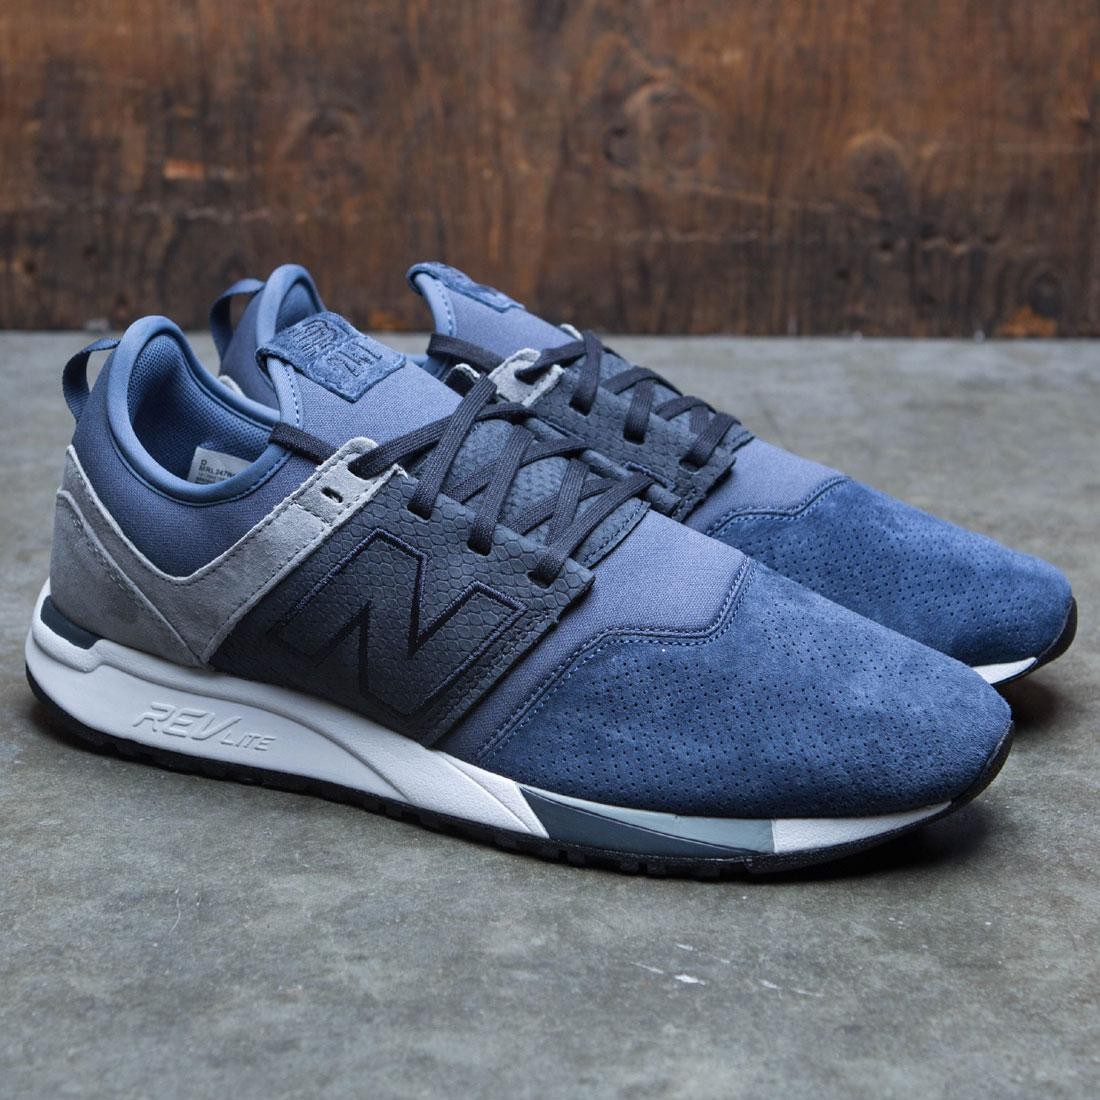 new balance men's 247 luxe shoes navy with navy & grey